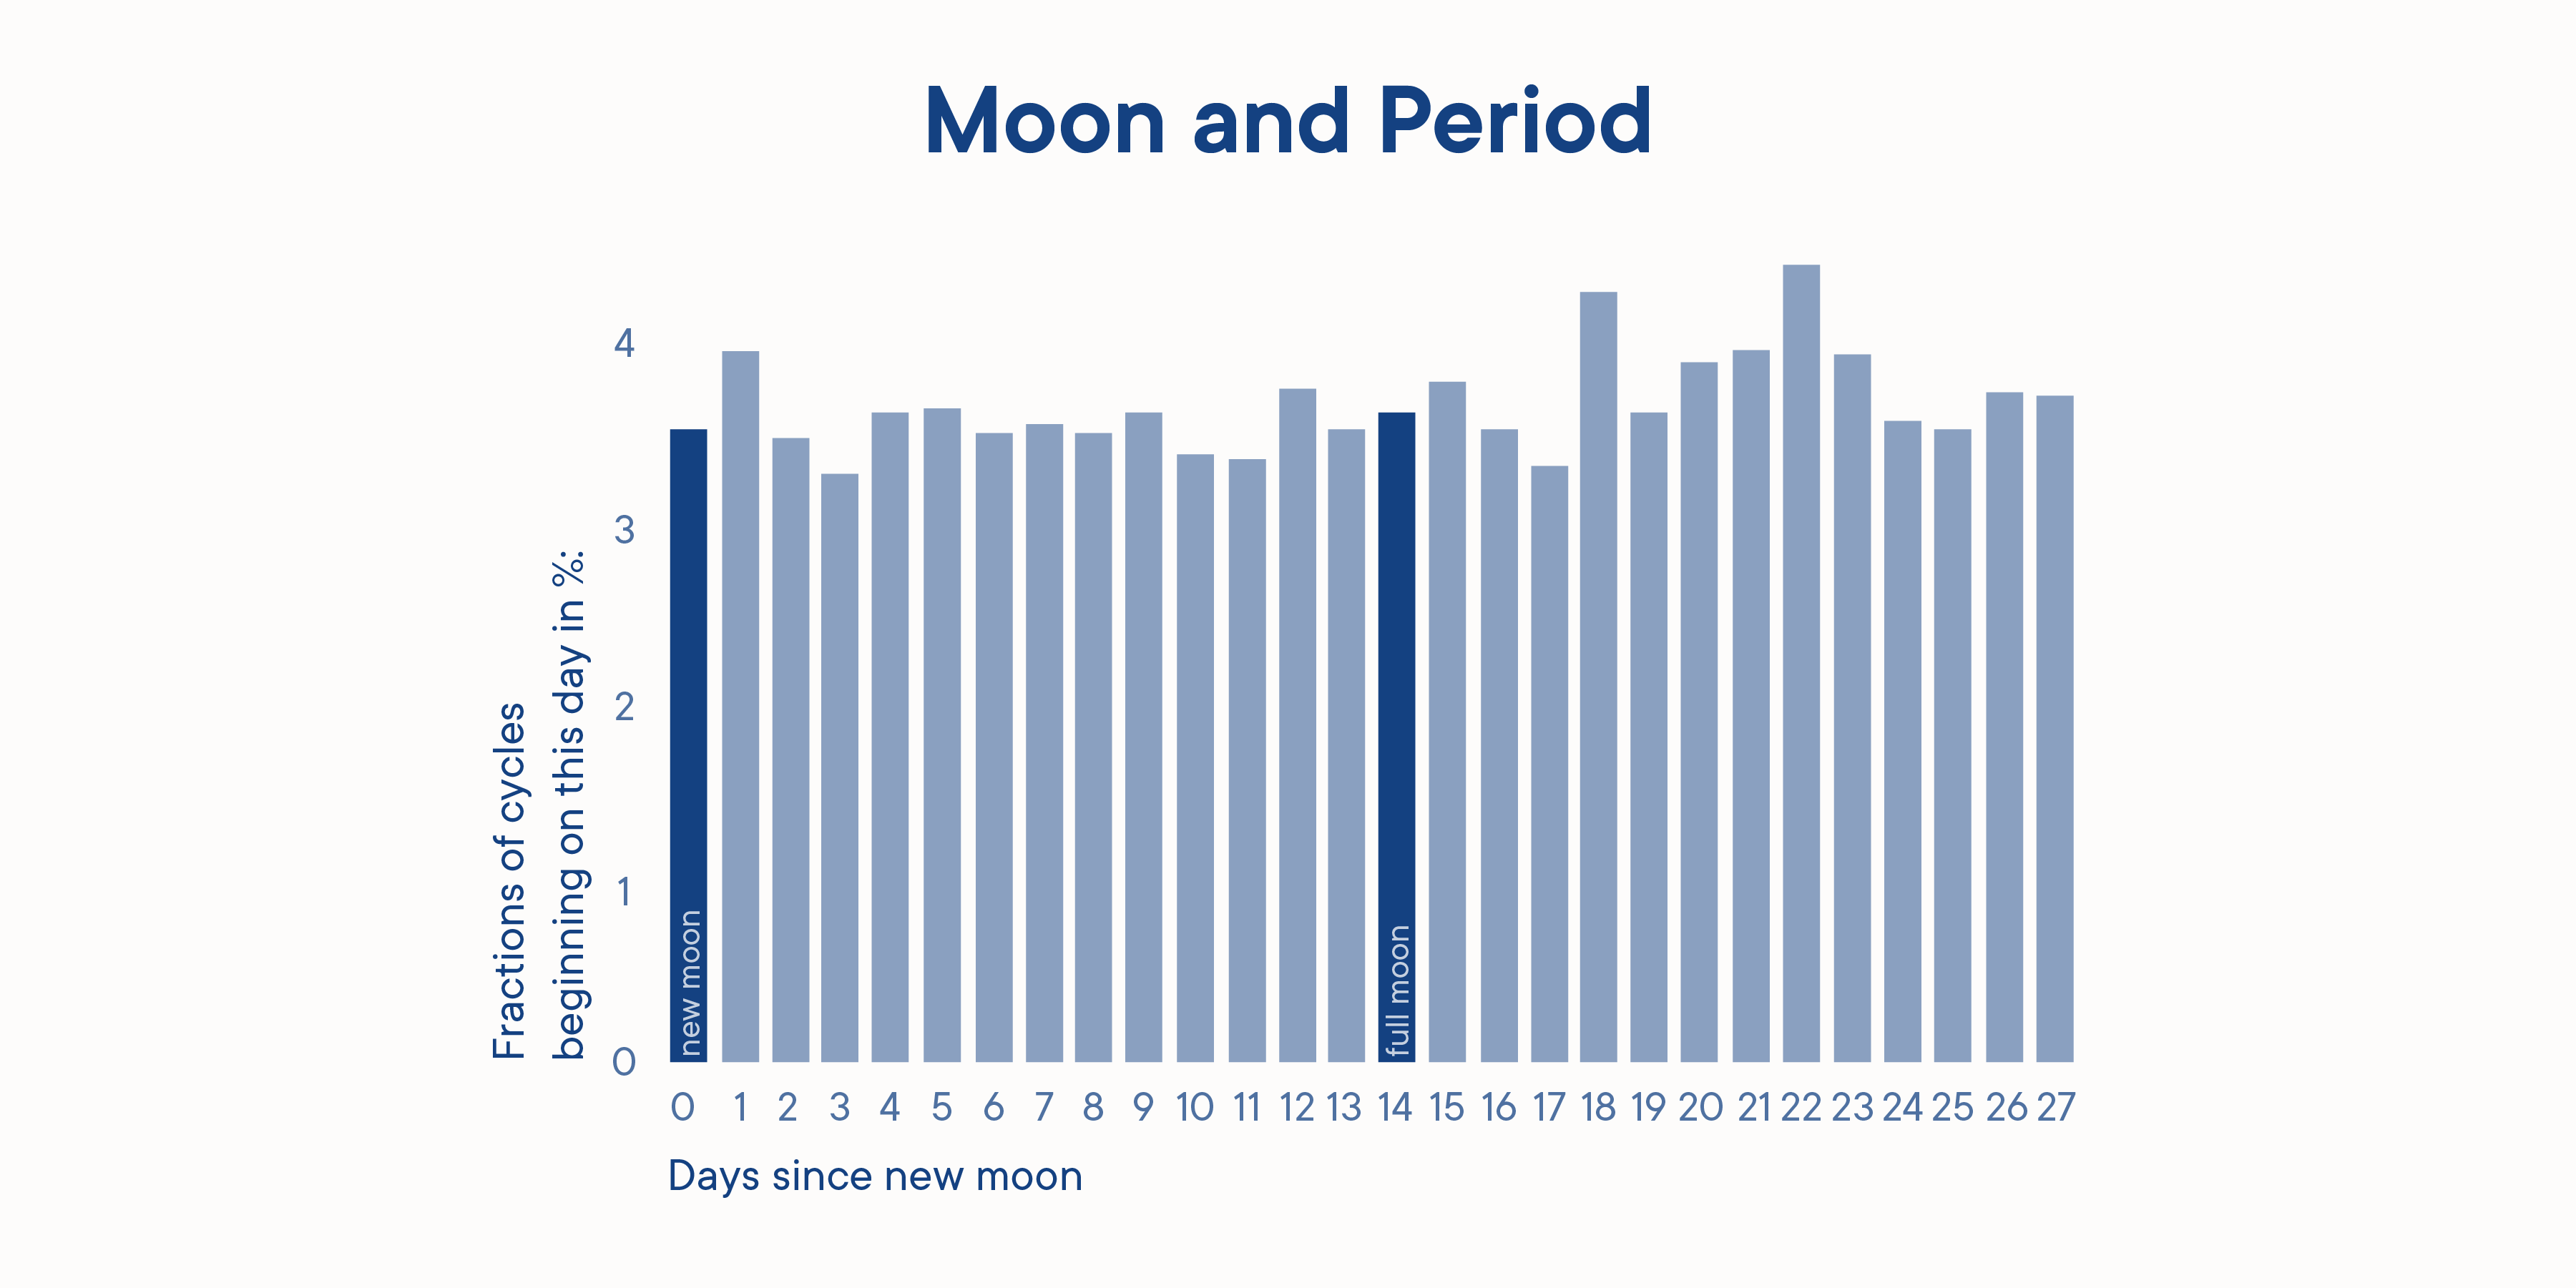 Connecting your Menstrual cycle to the Moon Cycle 